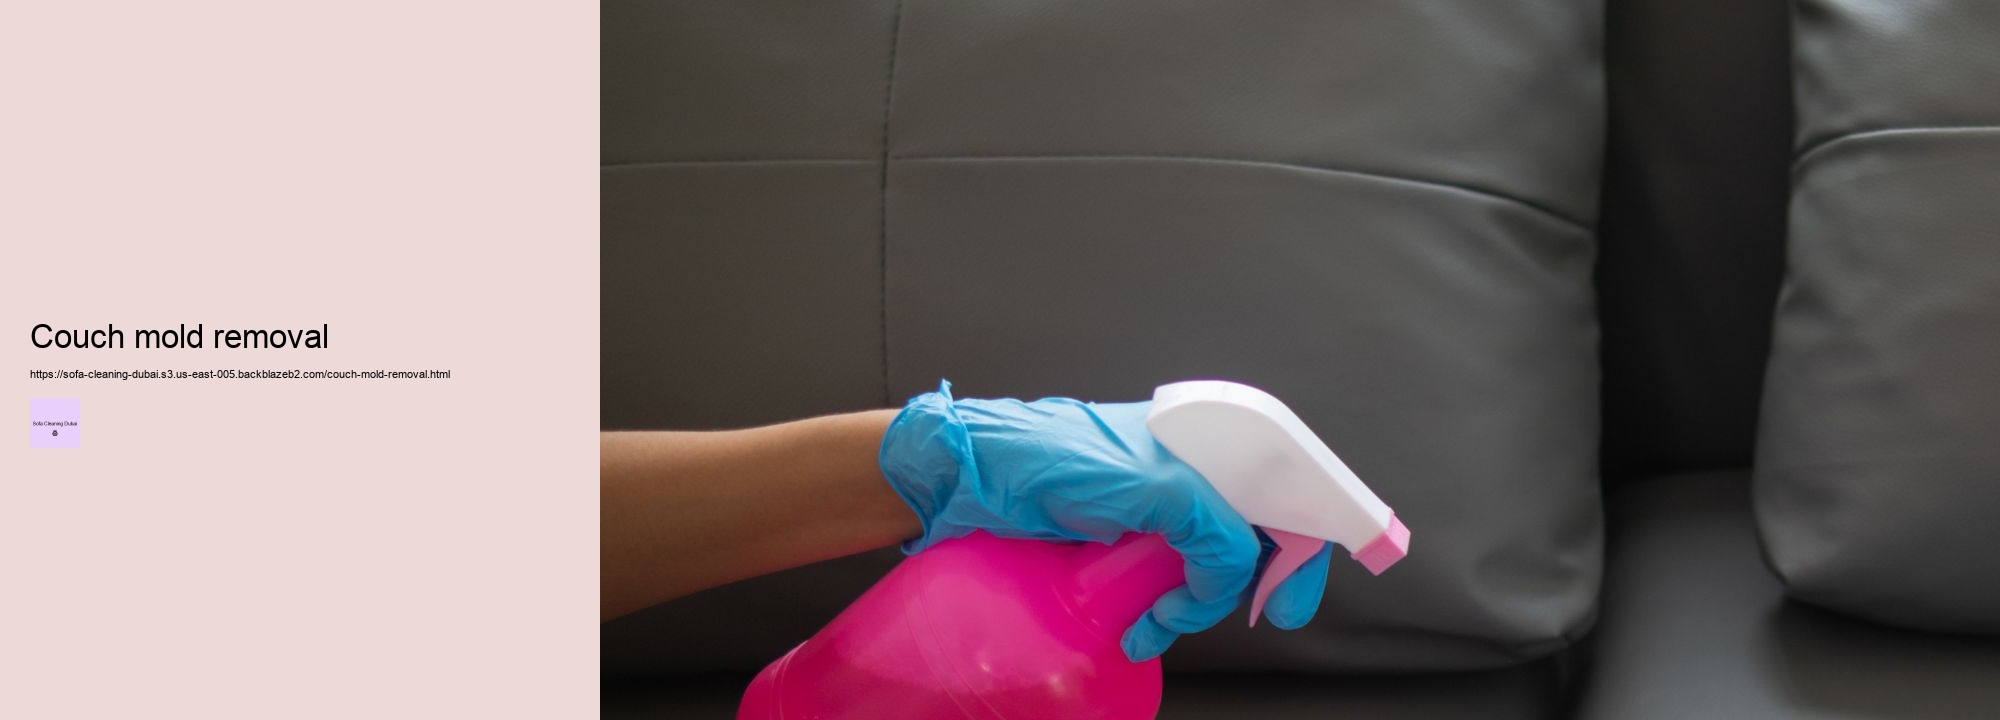 Discover How to Keep Your Sofa Looking New with Professional Cleaning Services in Dubai